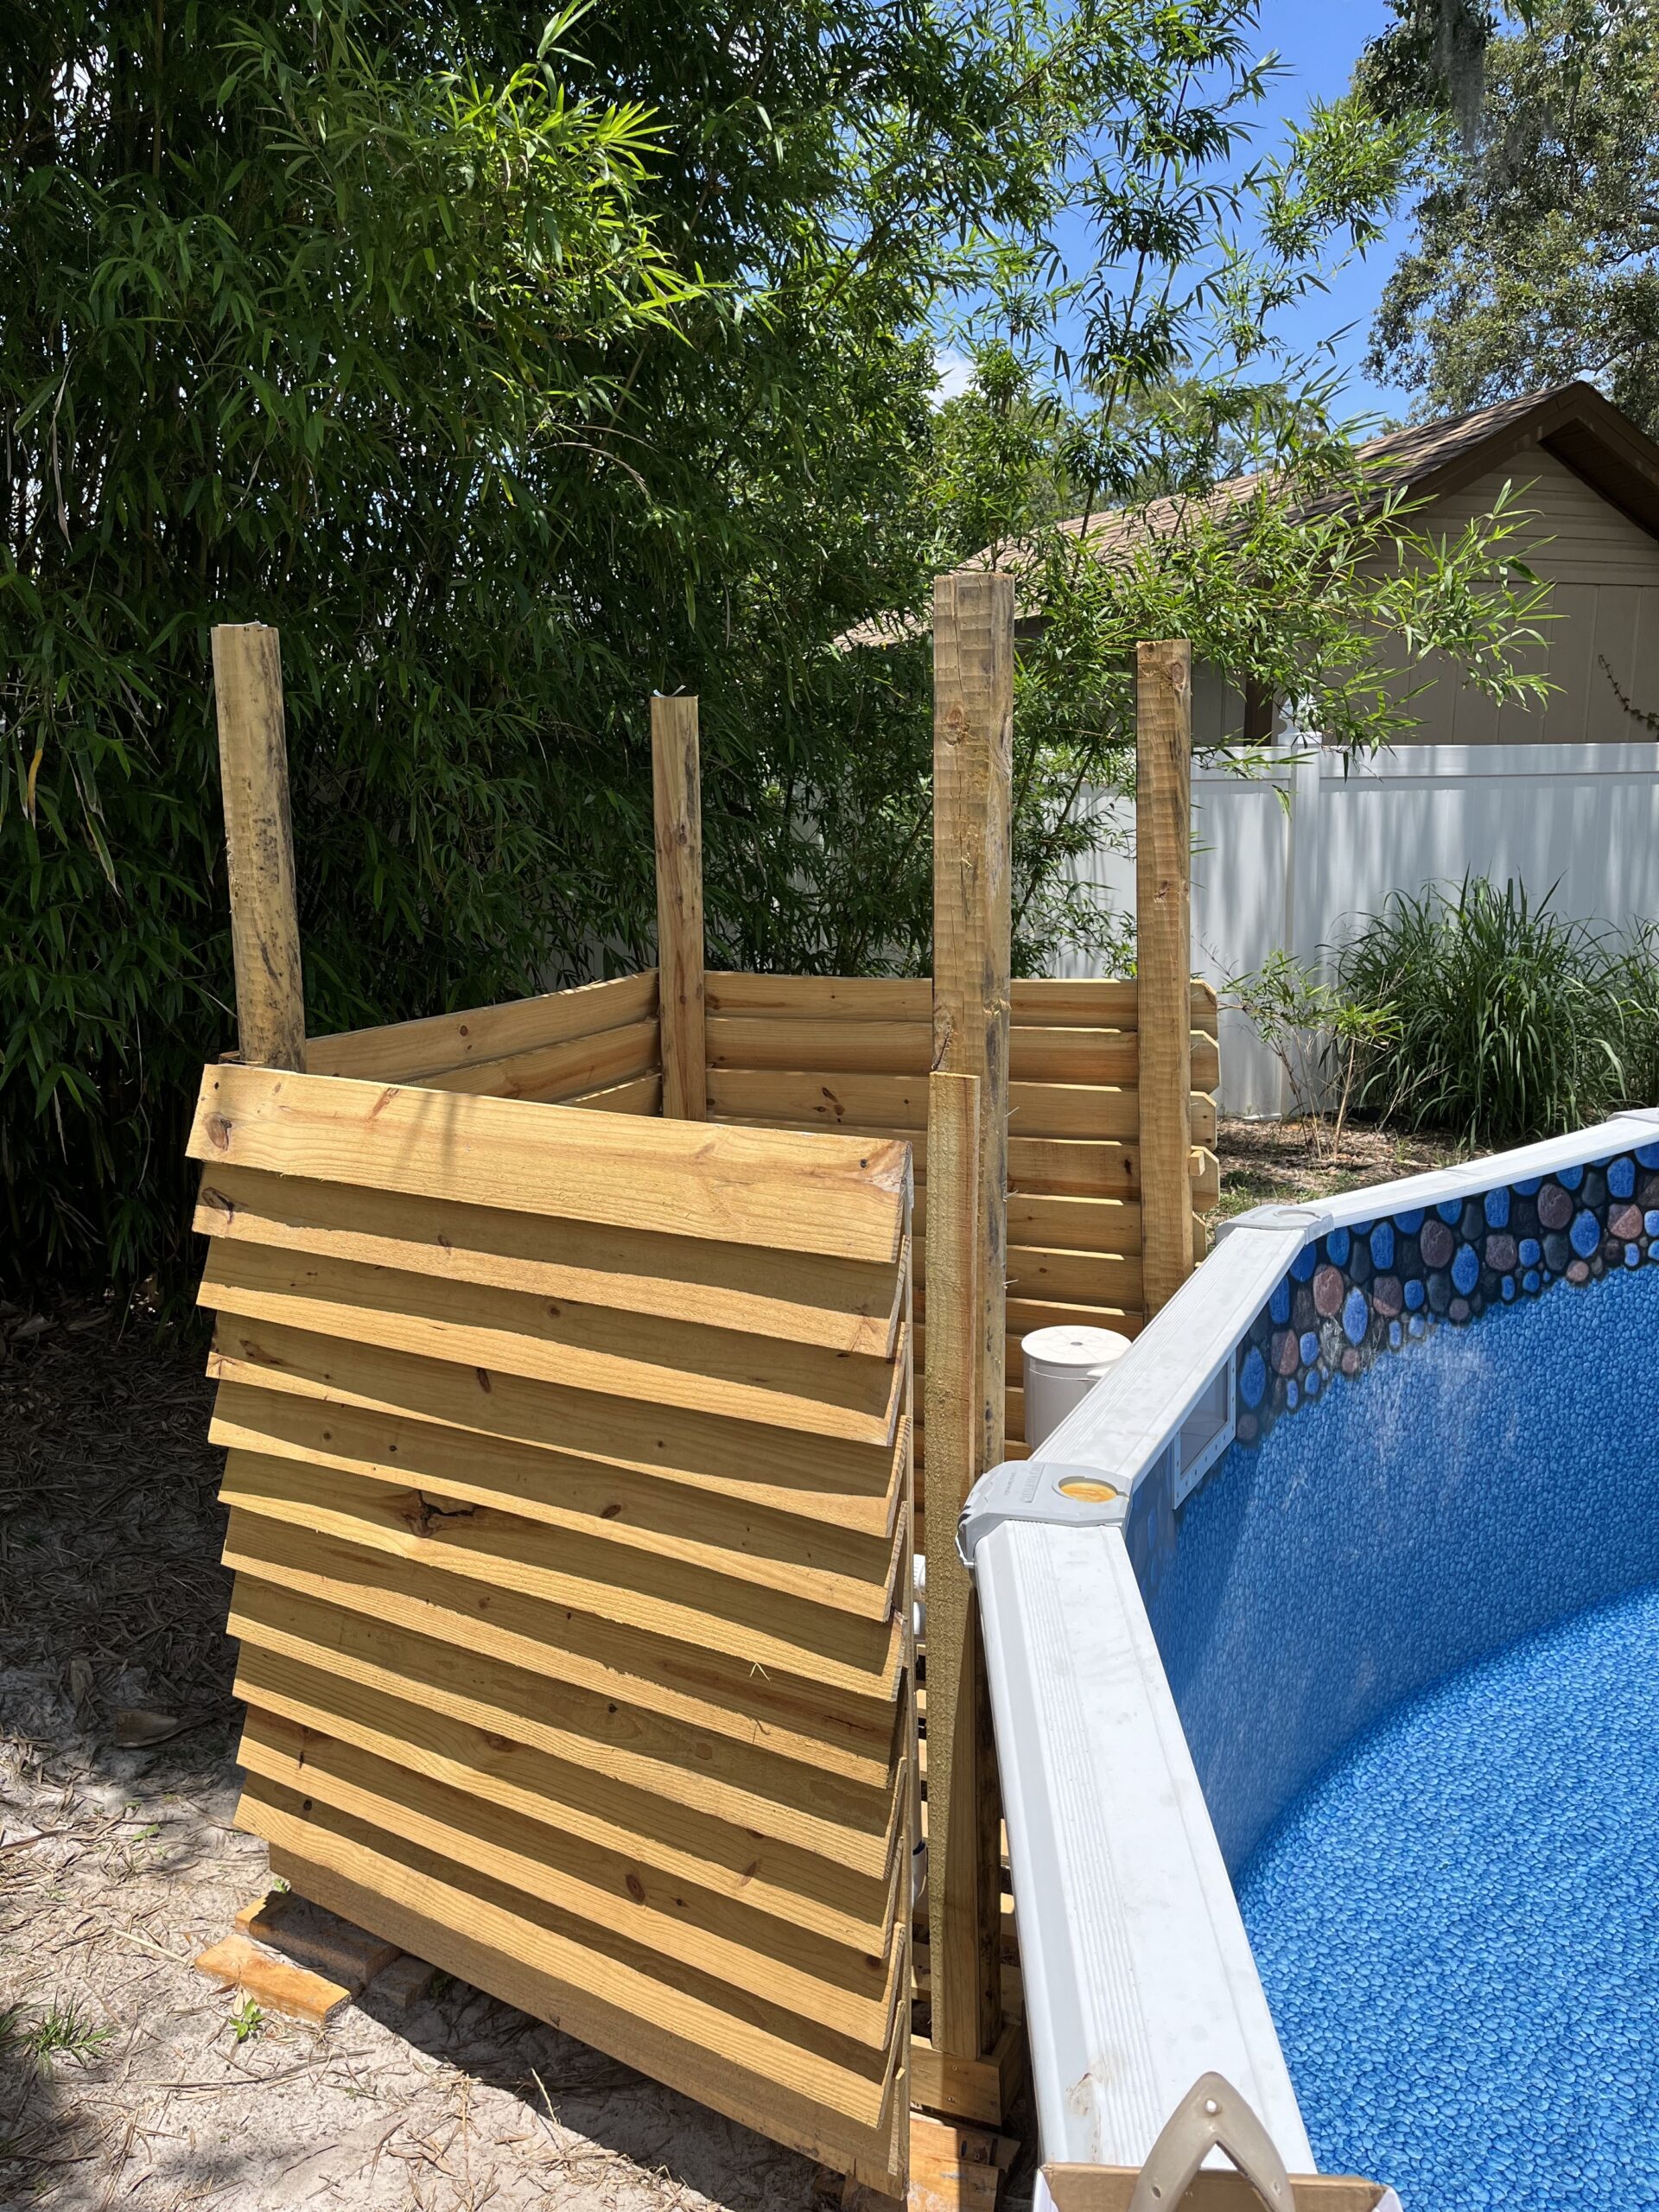 Enclosed doghouse hiding the pump and filter for and above ground pool